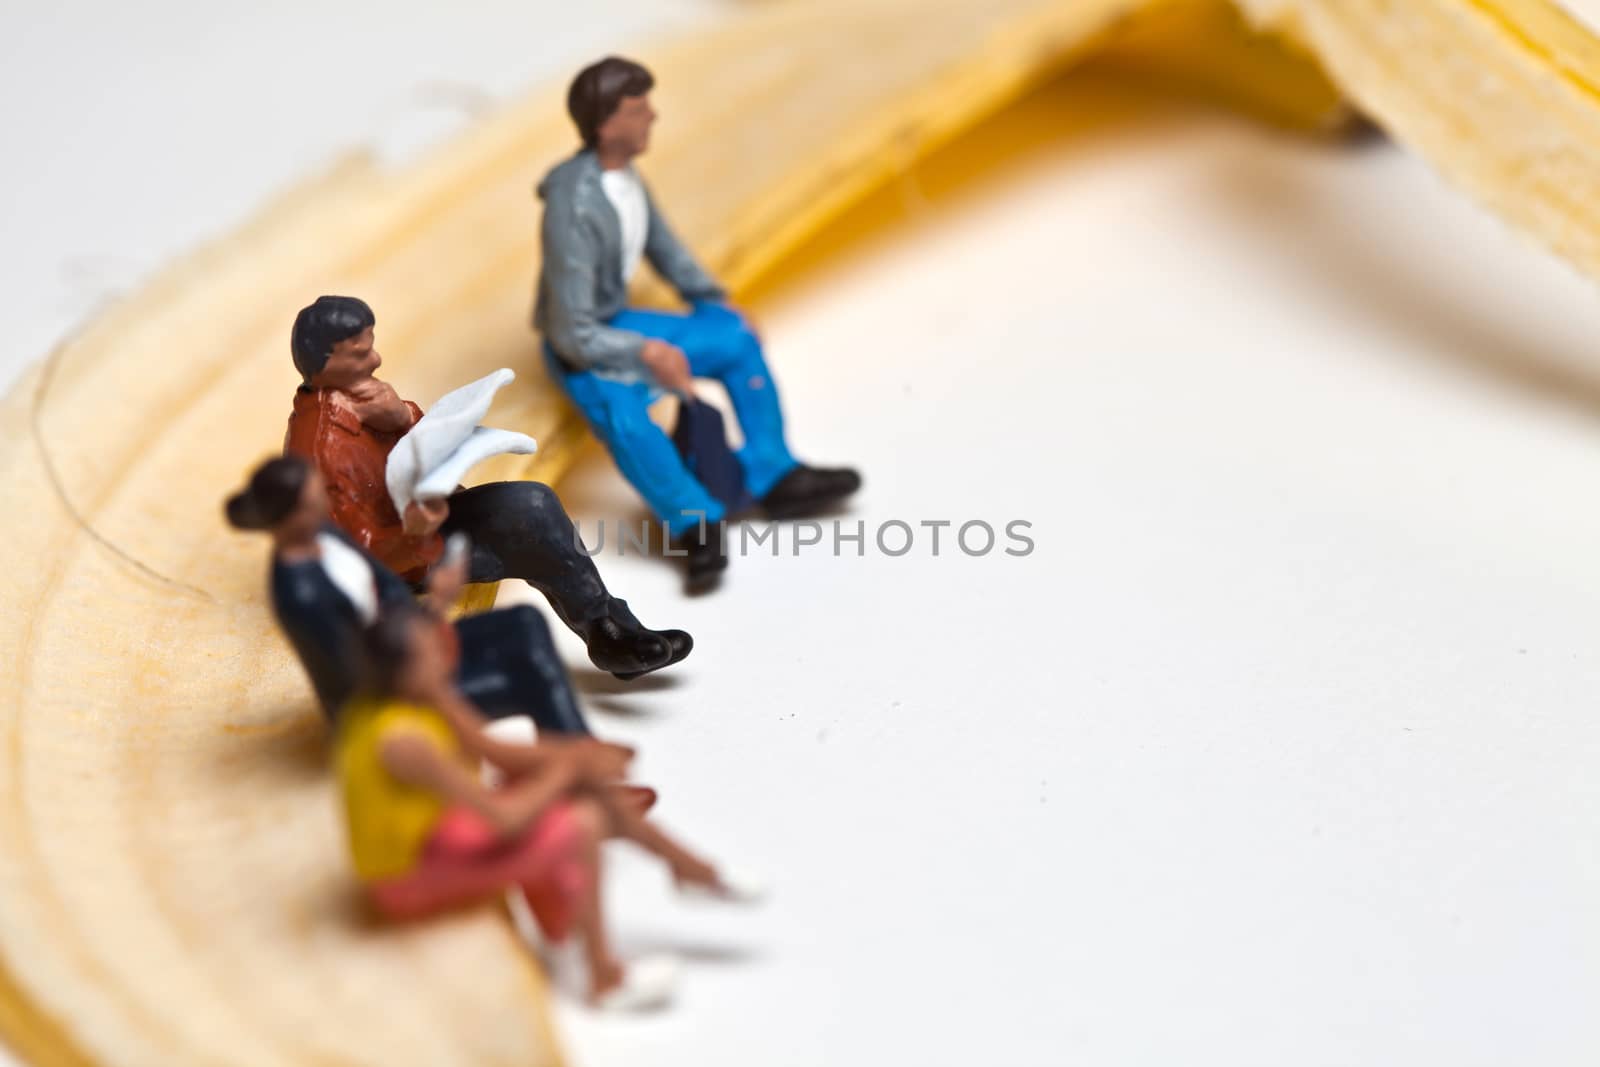 Miniature people in action in various situations